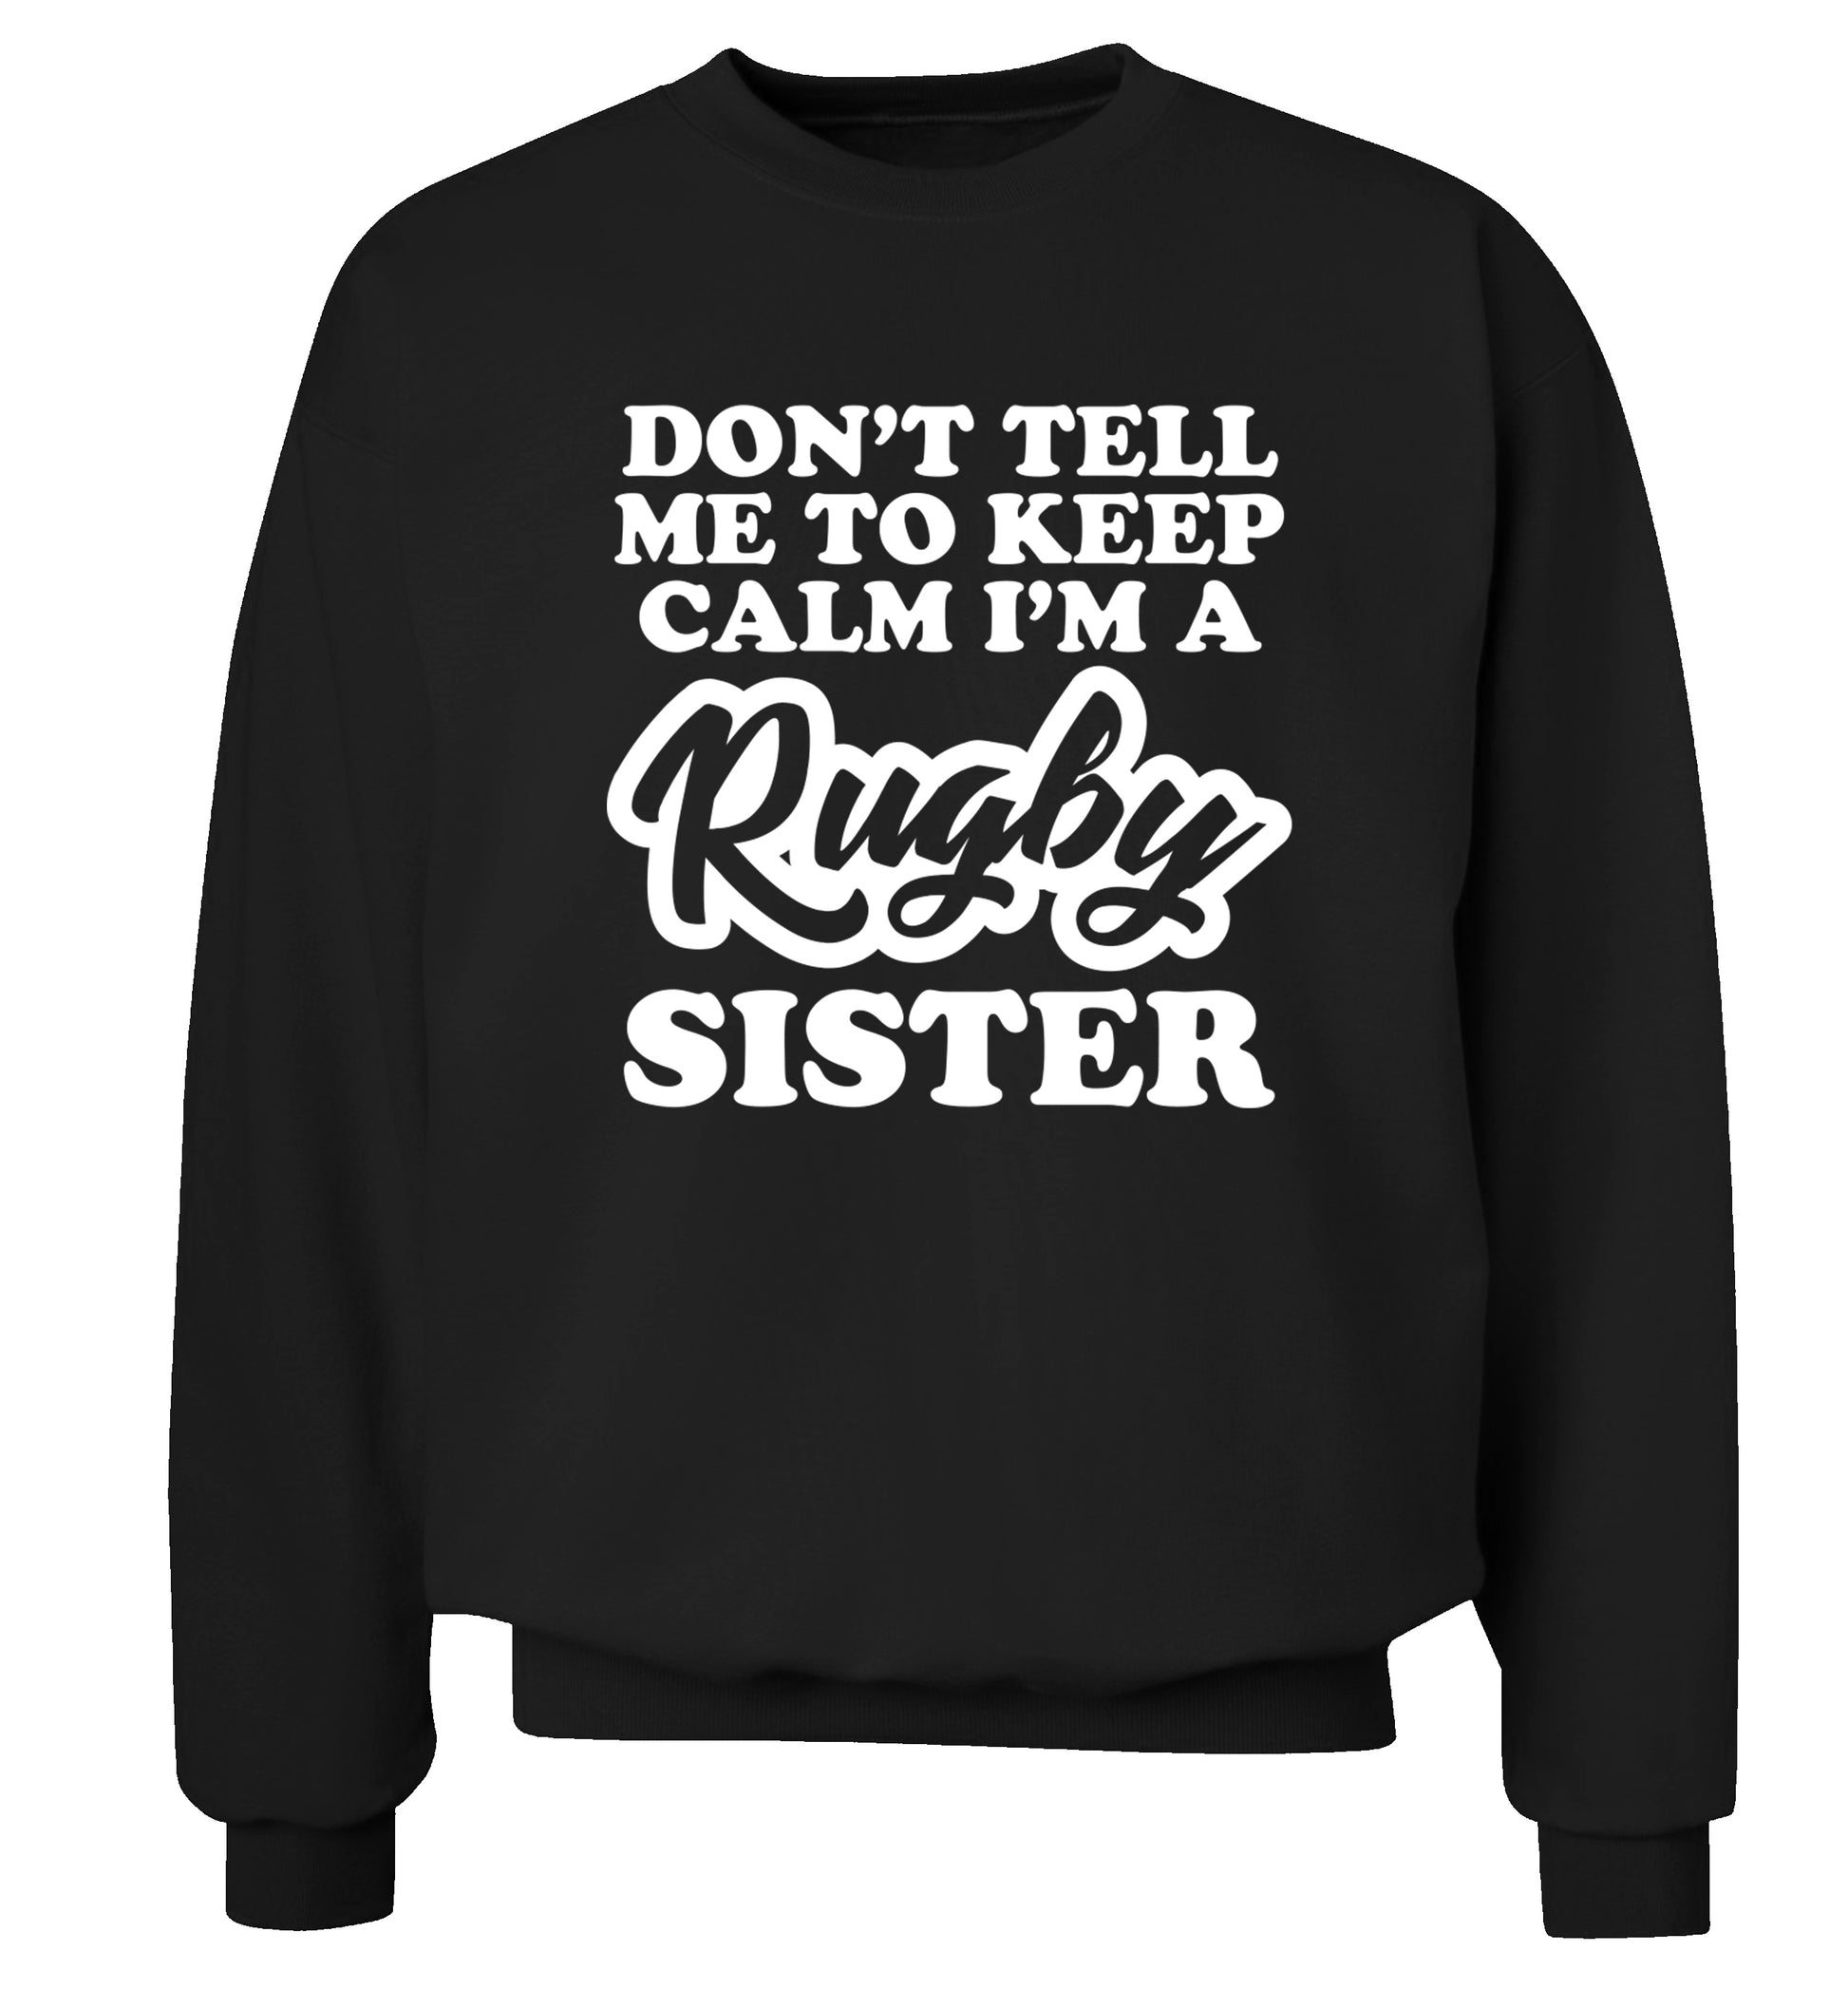 Don't tell me keep calm I'm a rugby sister Adult's unisex black Sweater 2XL